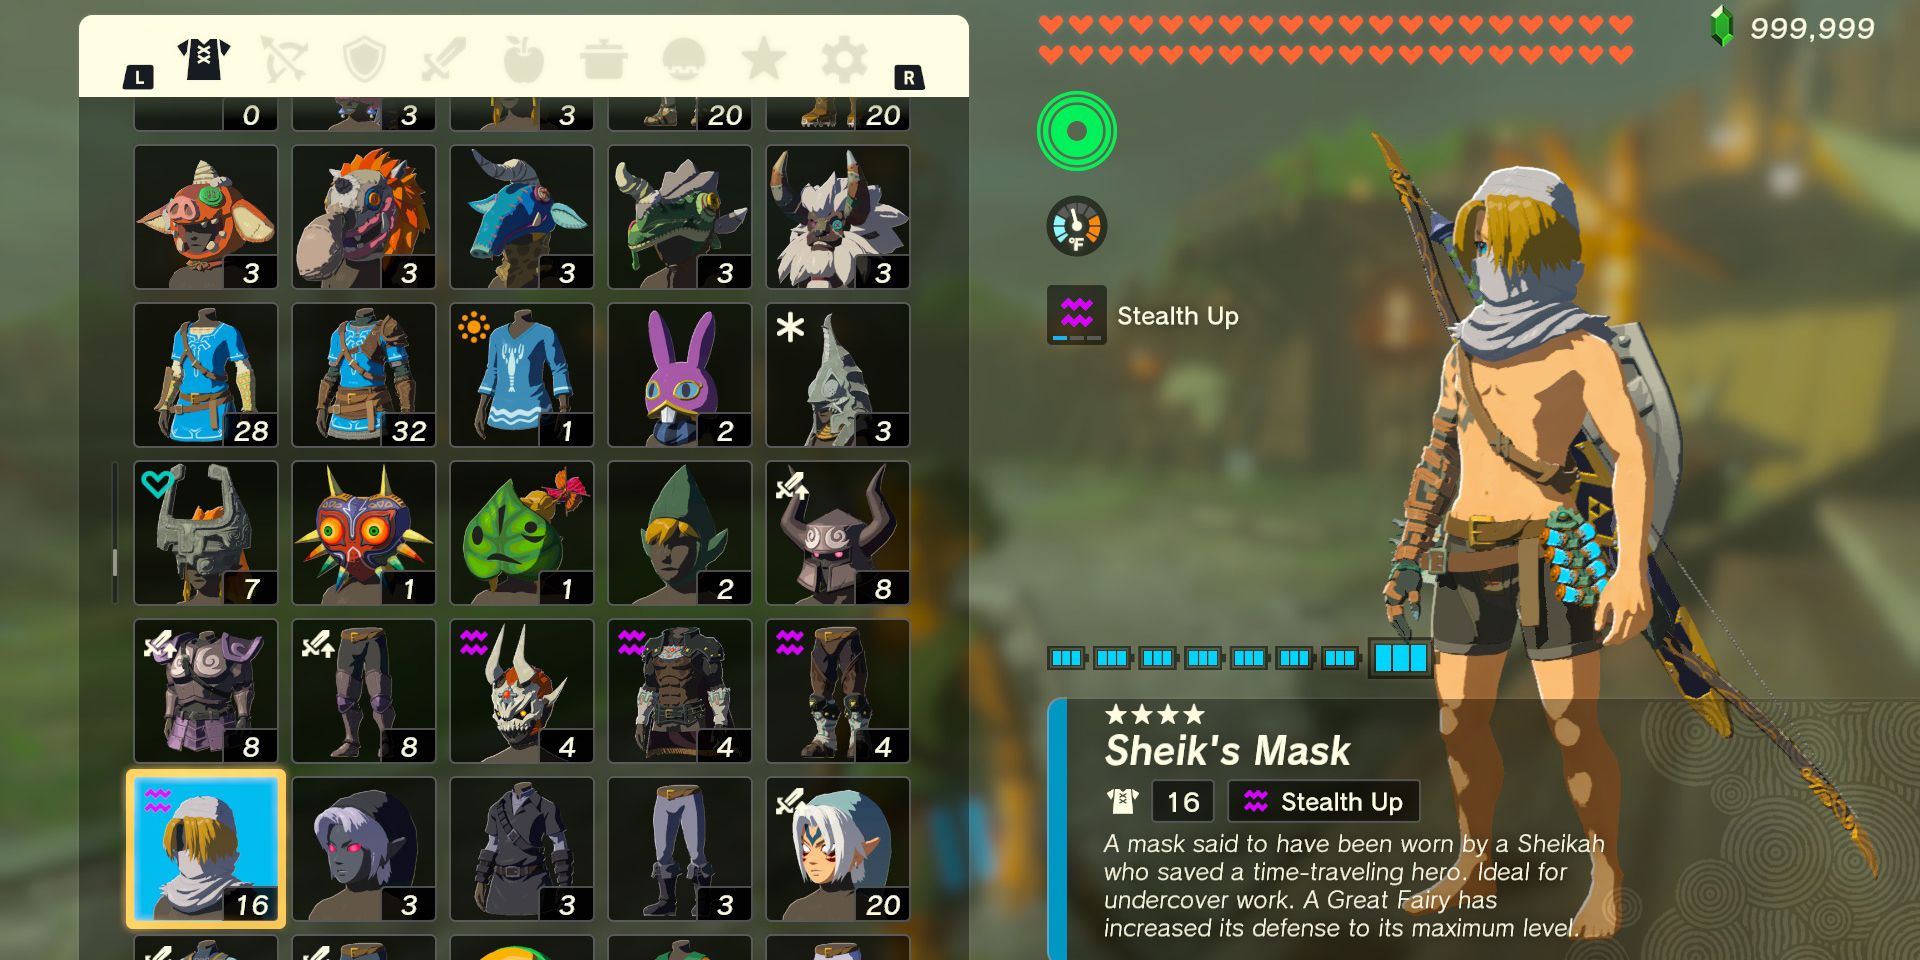 The Sheik's Mask armor piece in The Legend of Zelda: Tears of the Kingdom